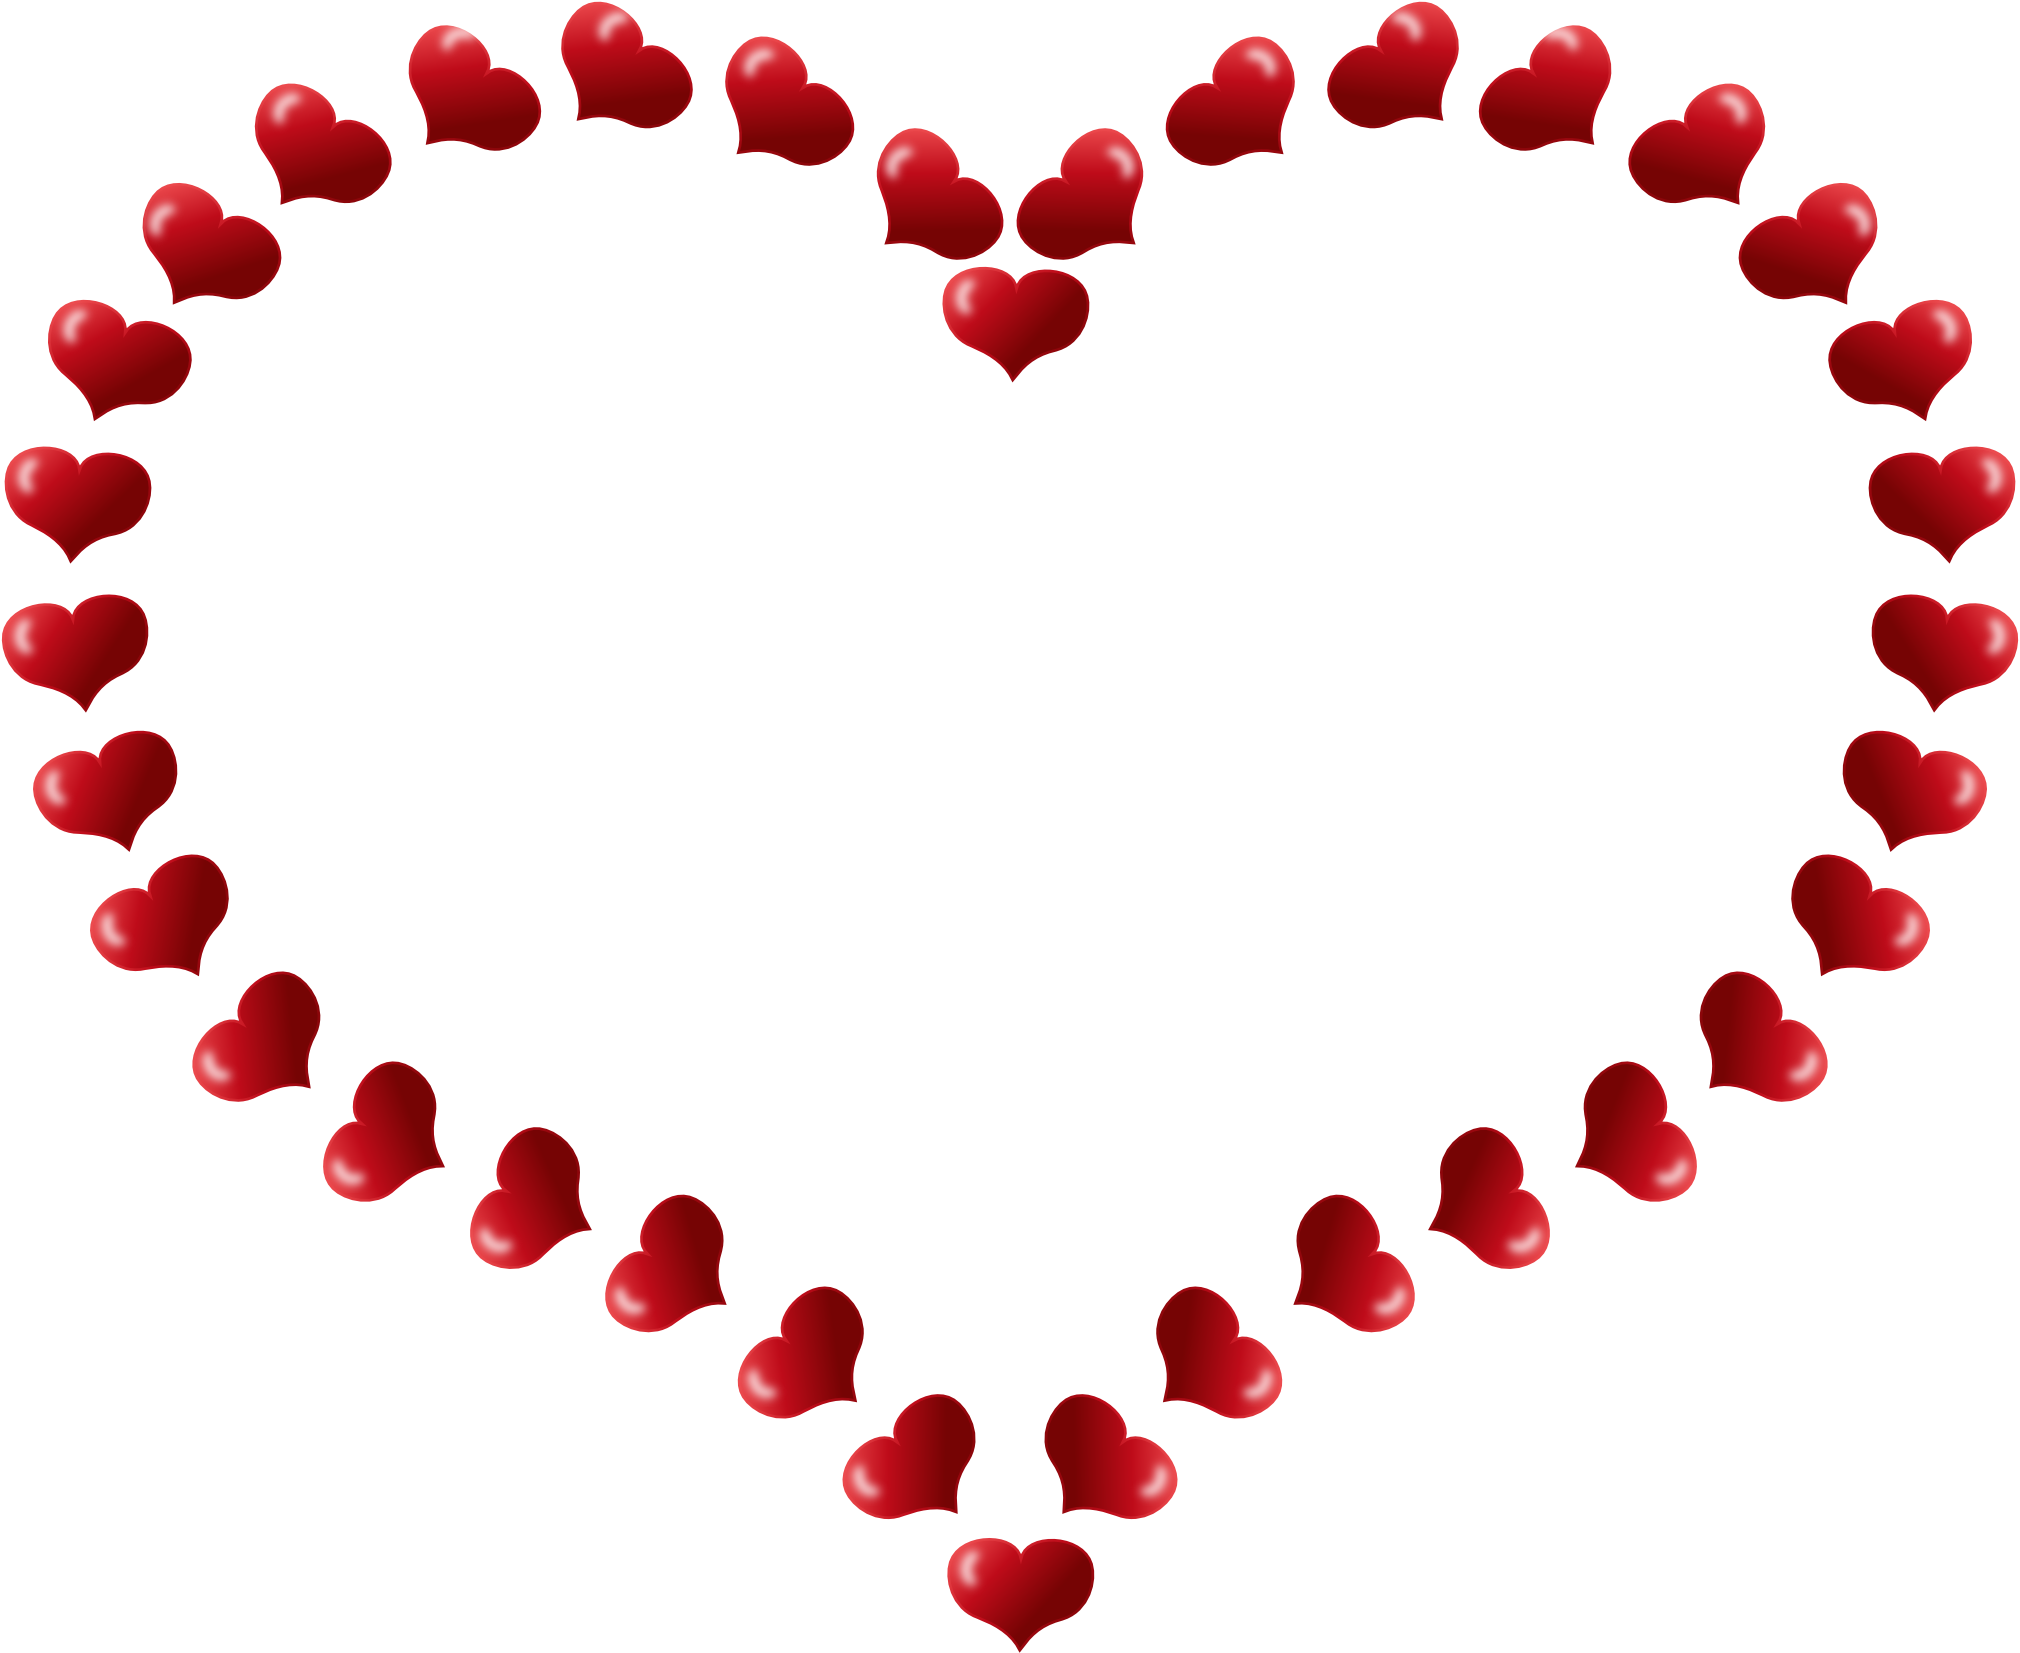 Hearts Border Clipart | Clipart library - Free Clipart Images